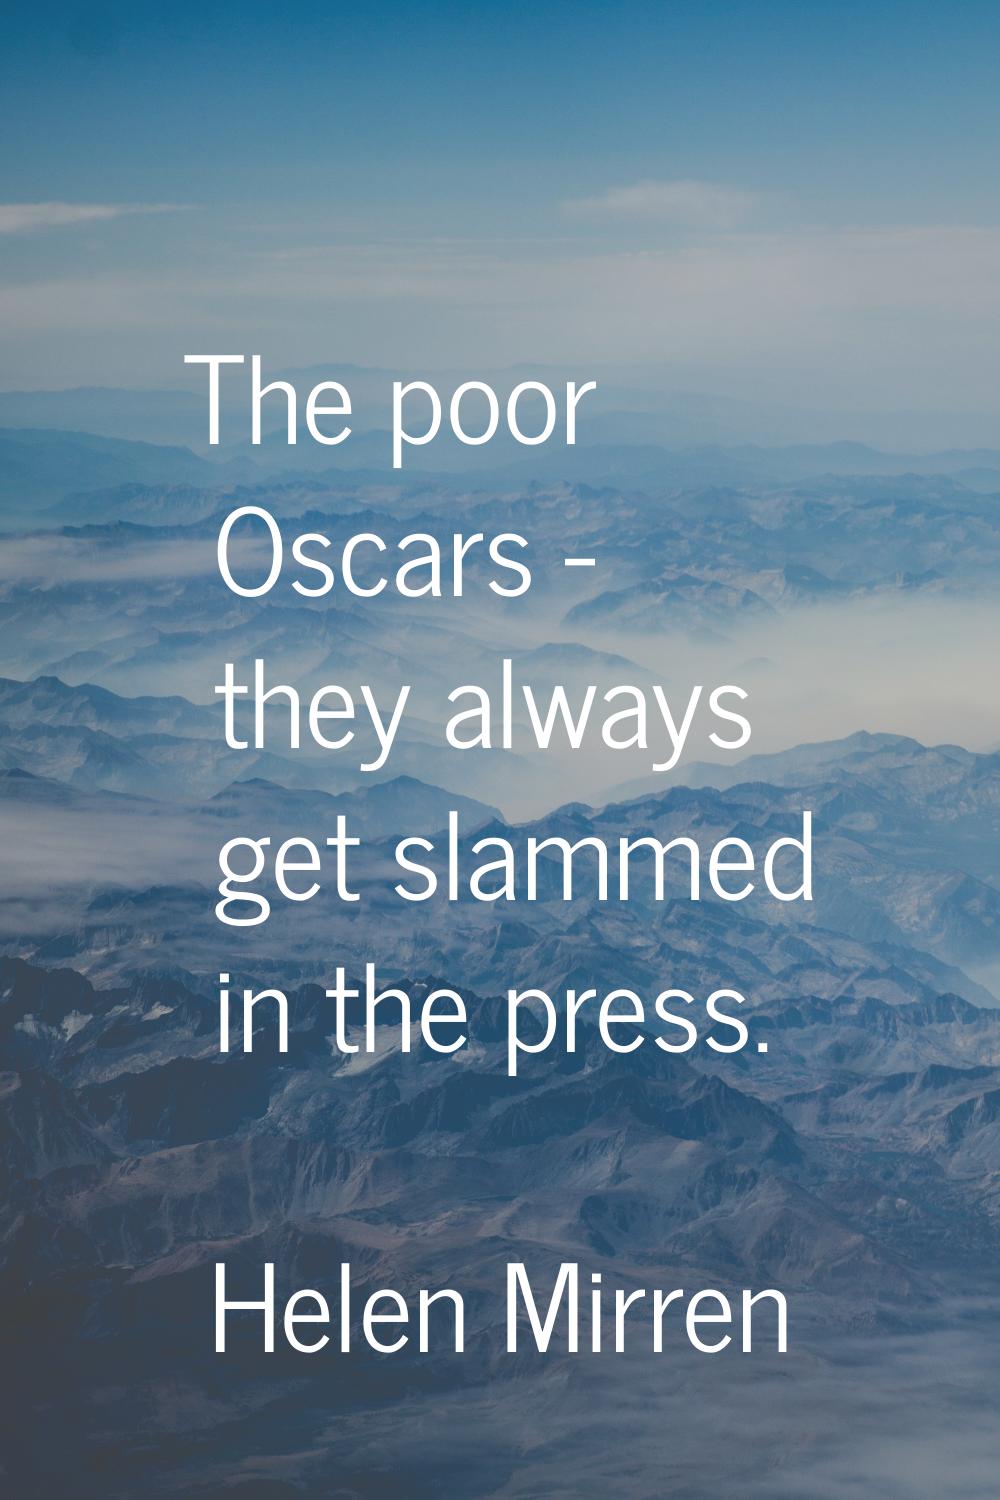 The poor Oscars - they always get slammed in the press.